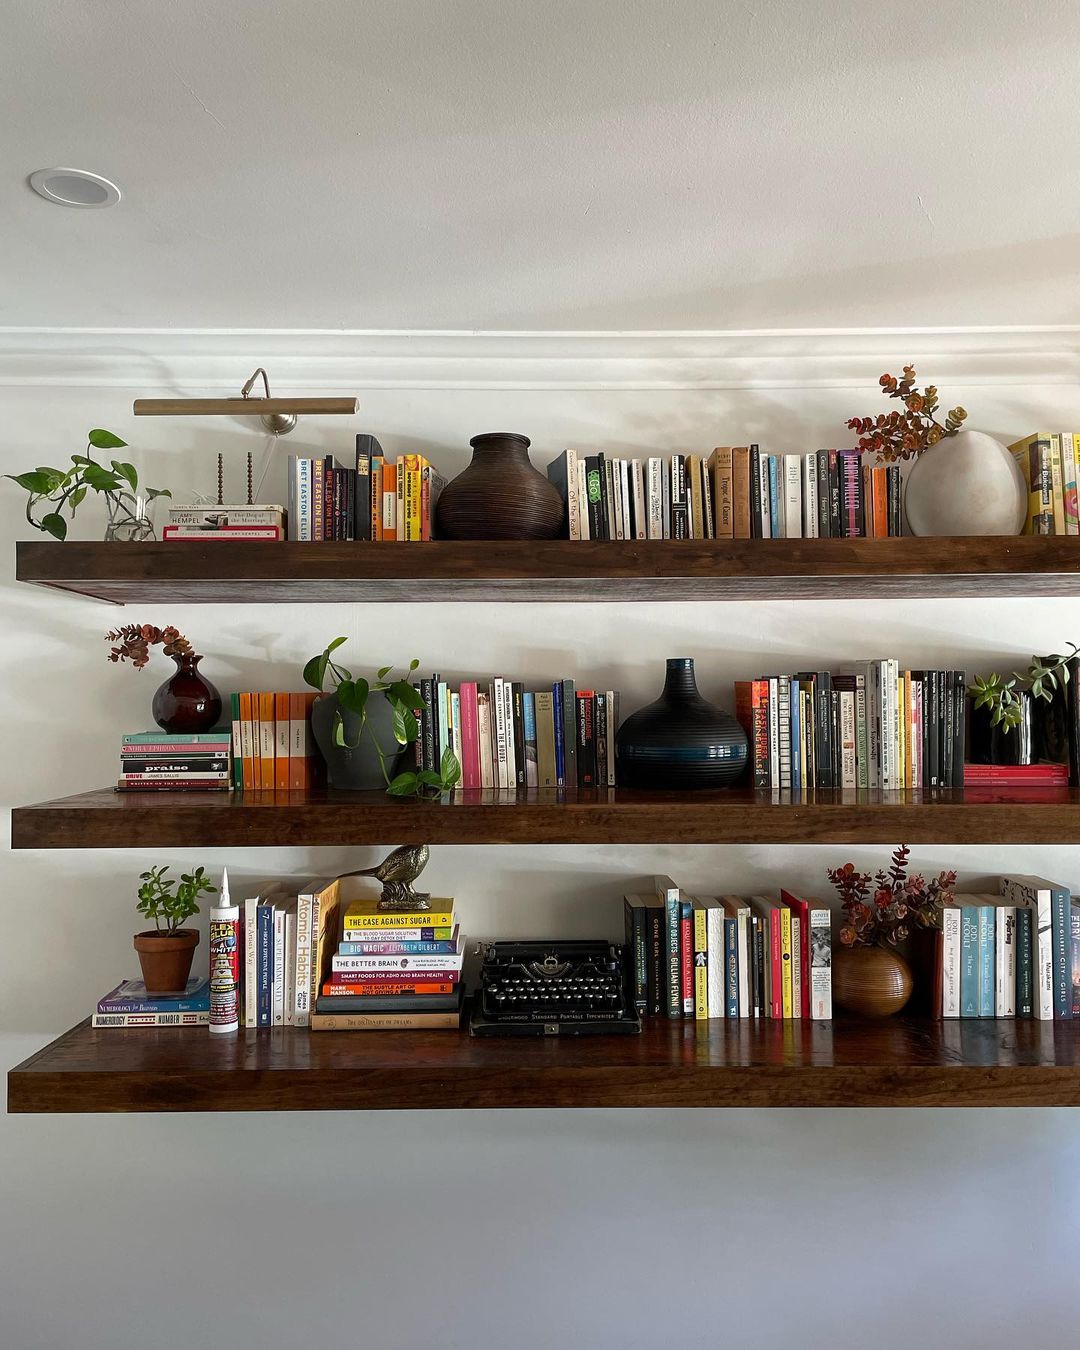 Cultured Comfort with Book-Laden Shelves